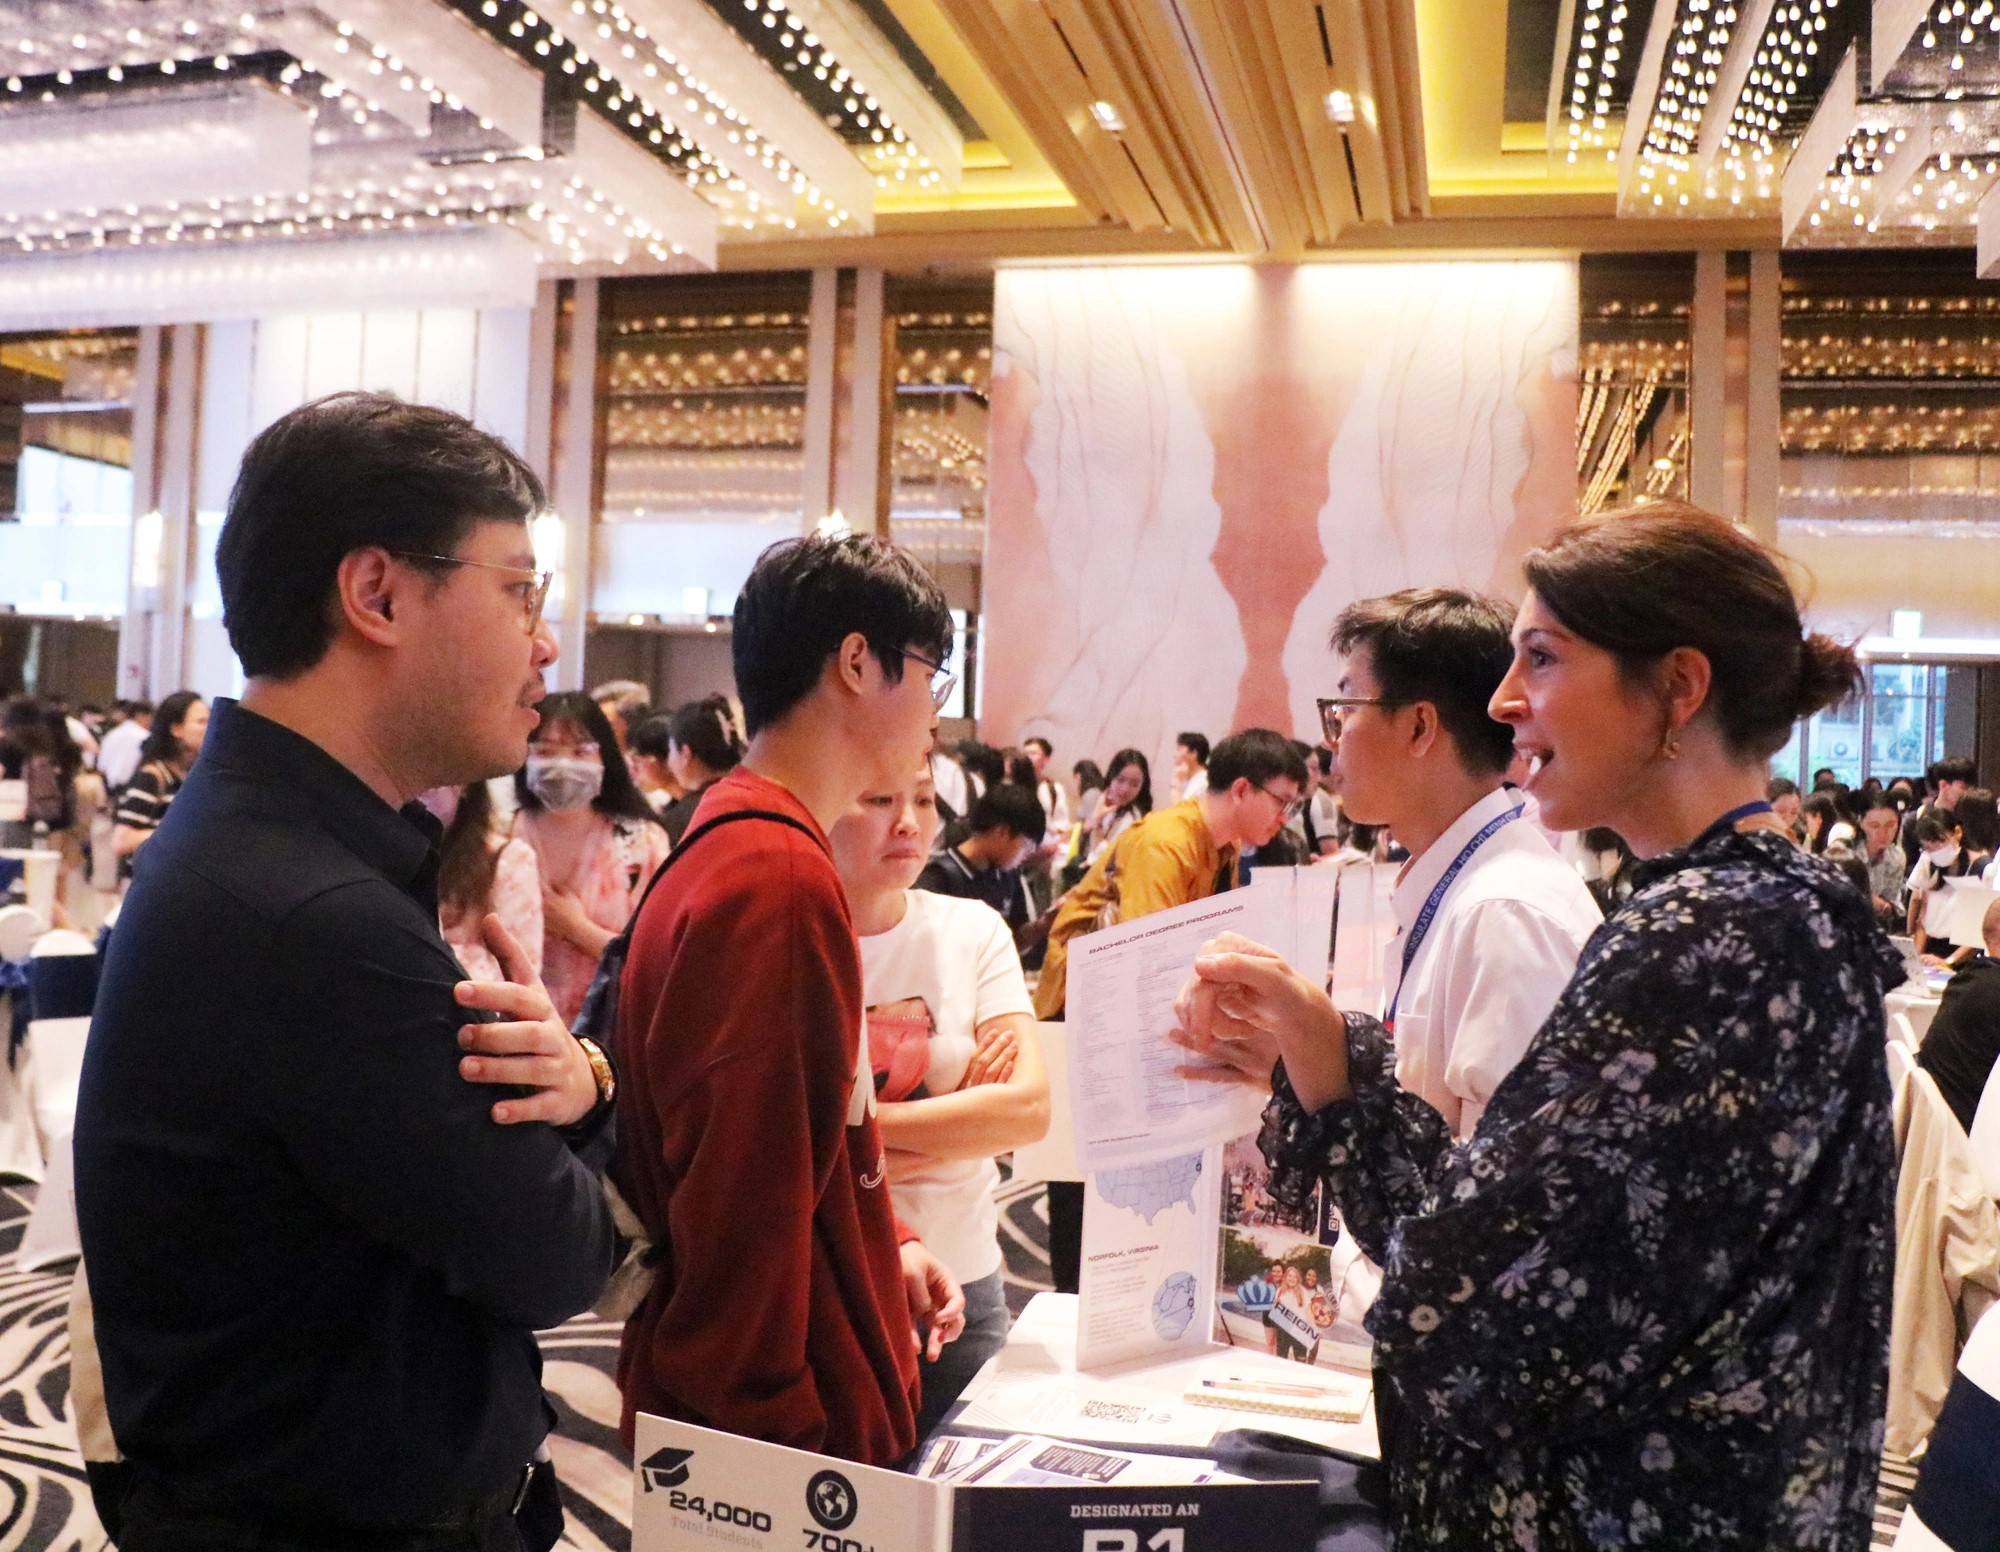 More than 60 American colleges and universities participated the event this year. Photo: Trong Nhan / Tuoi Tre